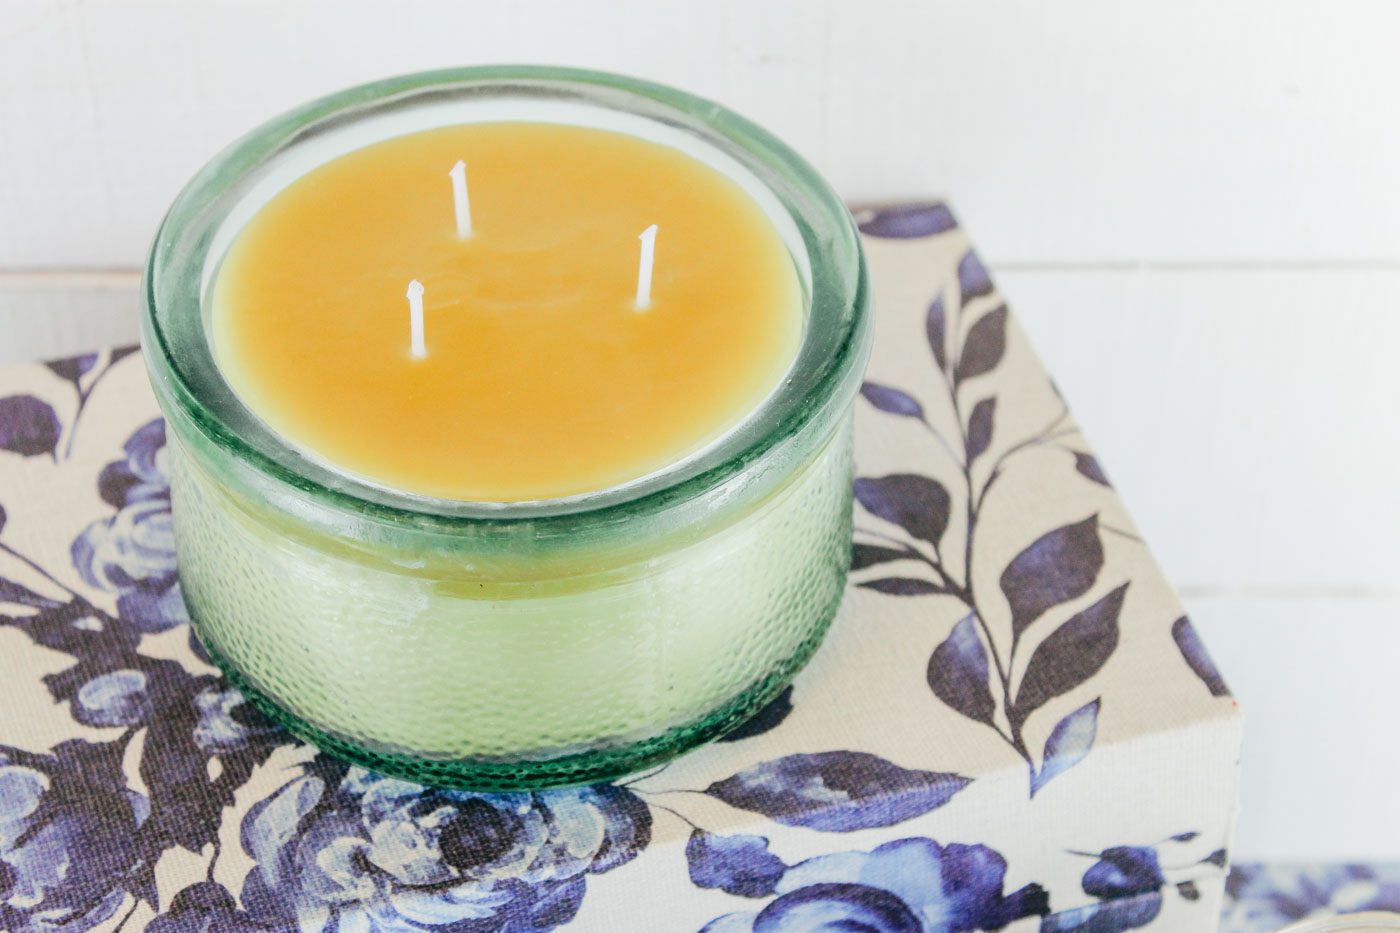 DIY Beeswax Gifts: Lip balm, Candles, and Beeswax Wraps!